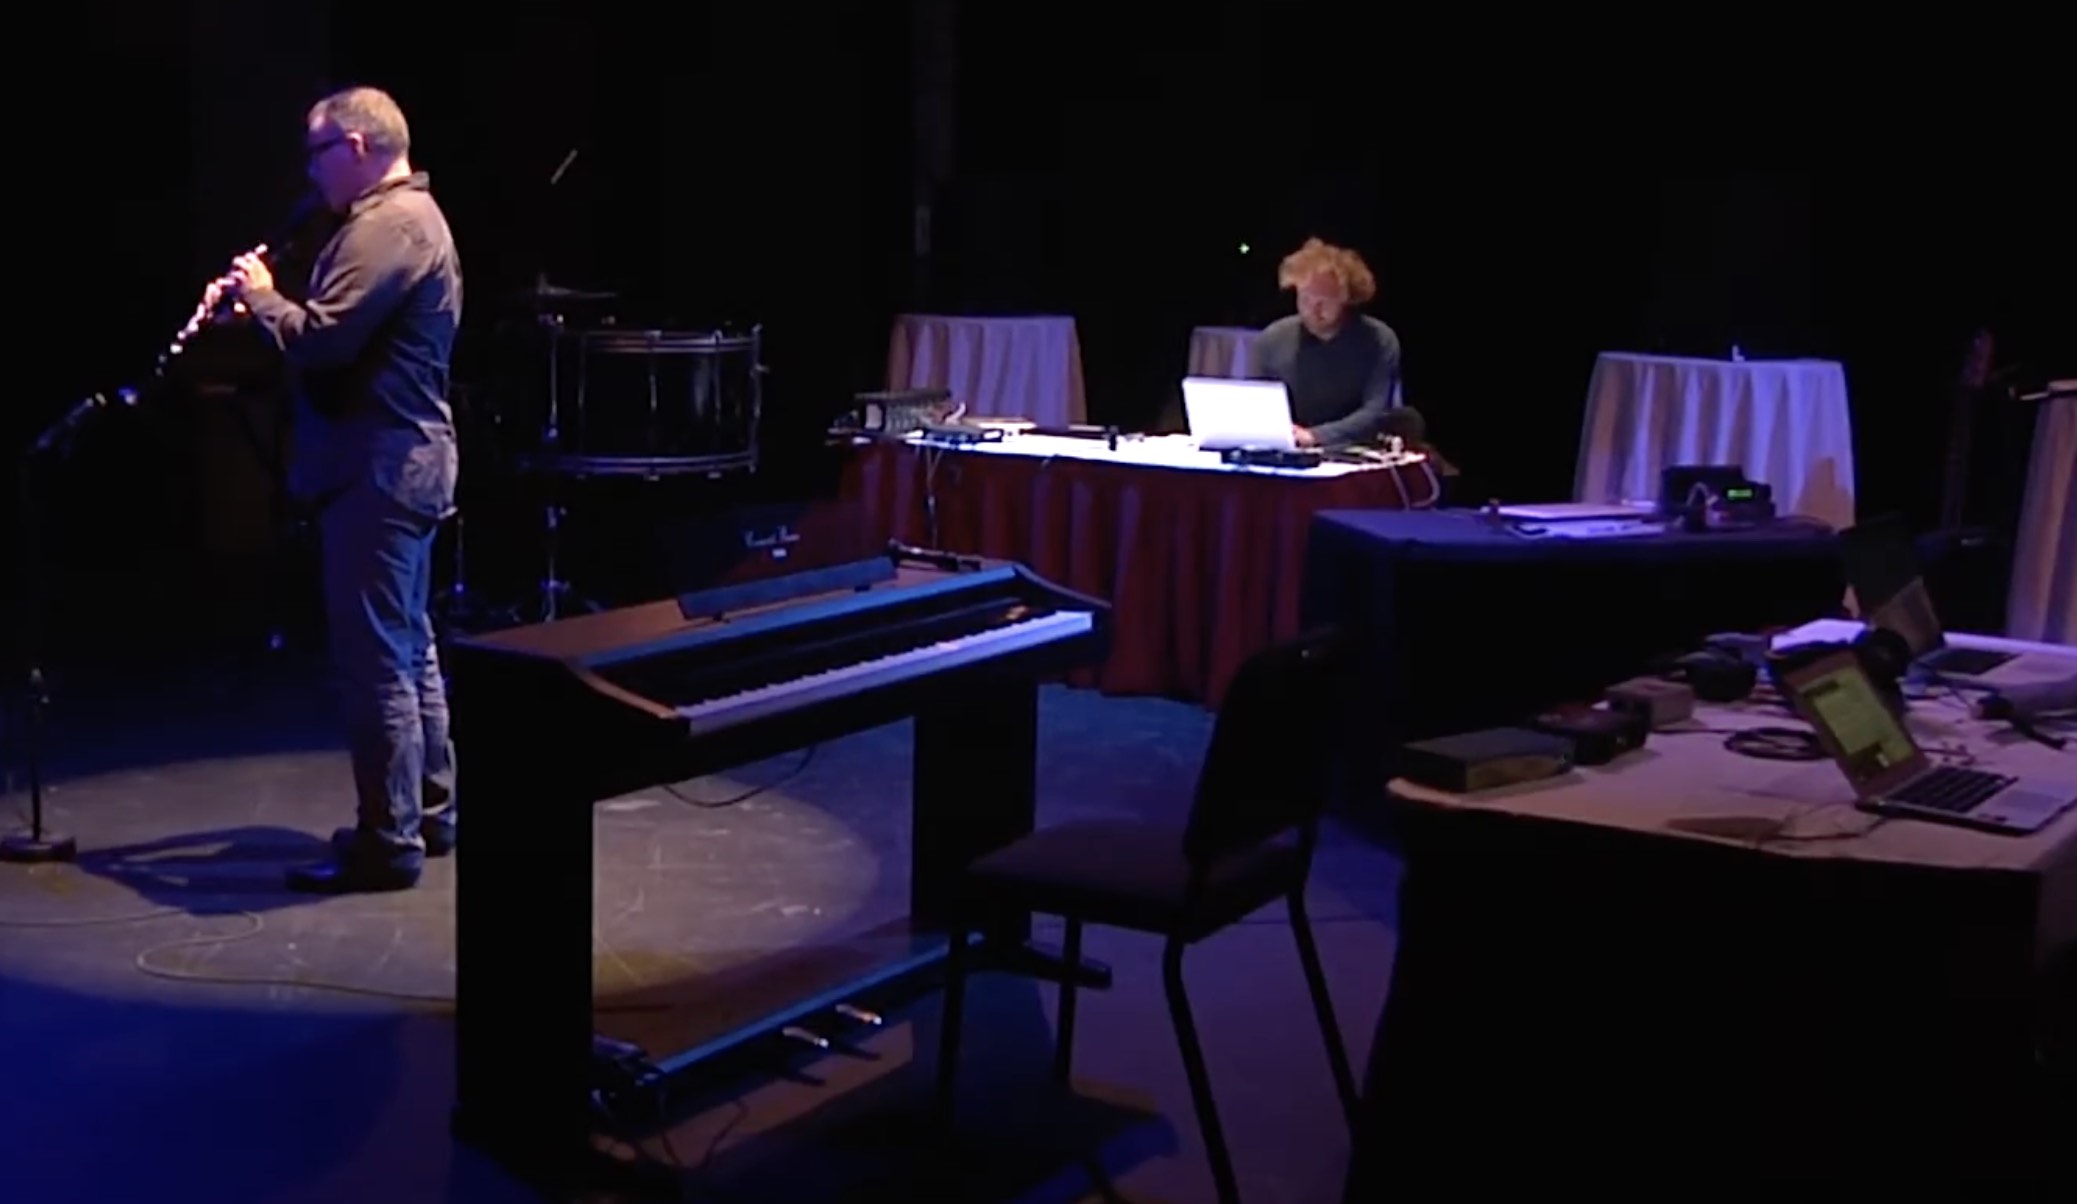 Clarinetist François Houle improvises with Zamyatin, a virtual improviser designed by Oliver Bown. Shown are Houle playing clarinet to a microphone on a stand, an electric piano (unused), and Bown seated at a table in front of a laptop.